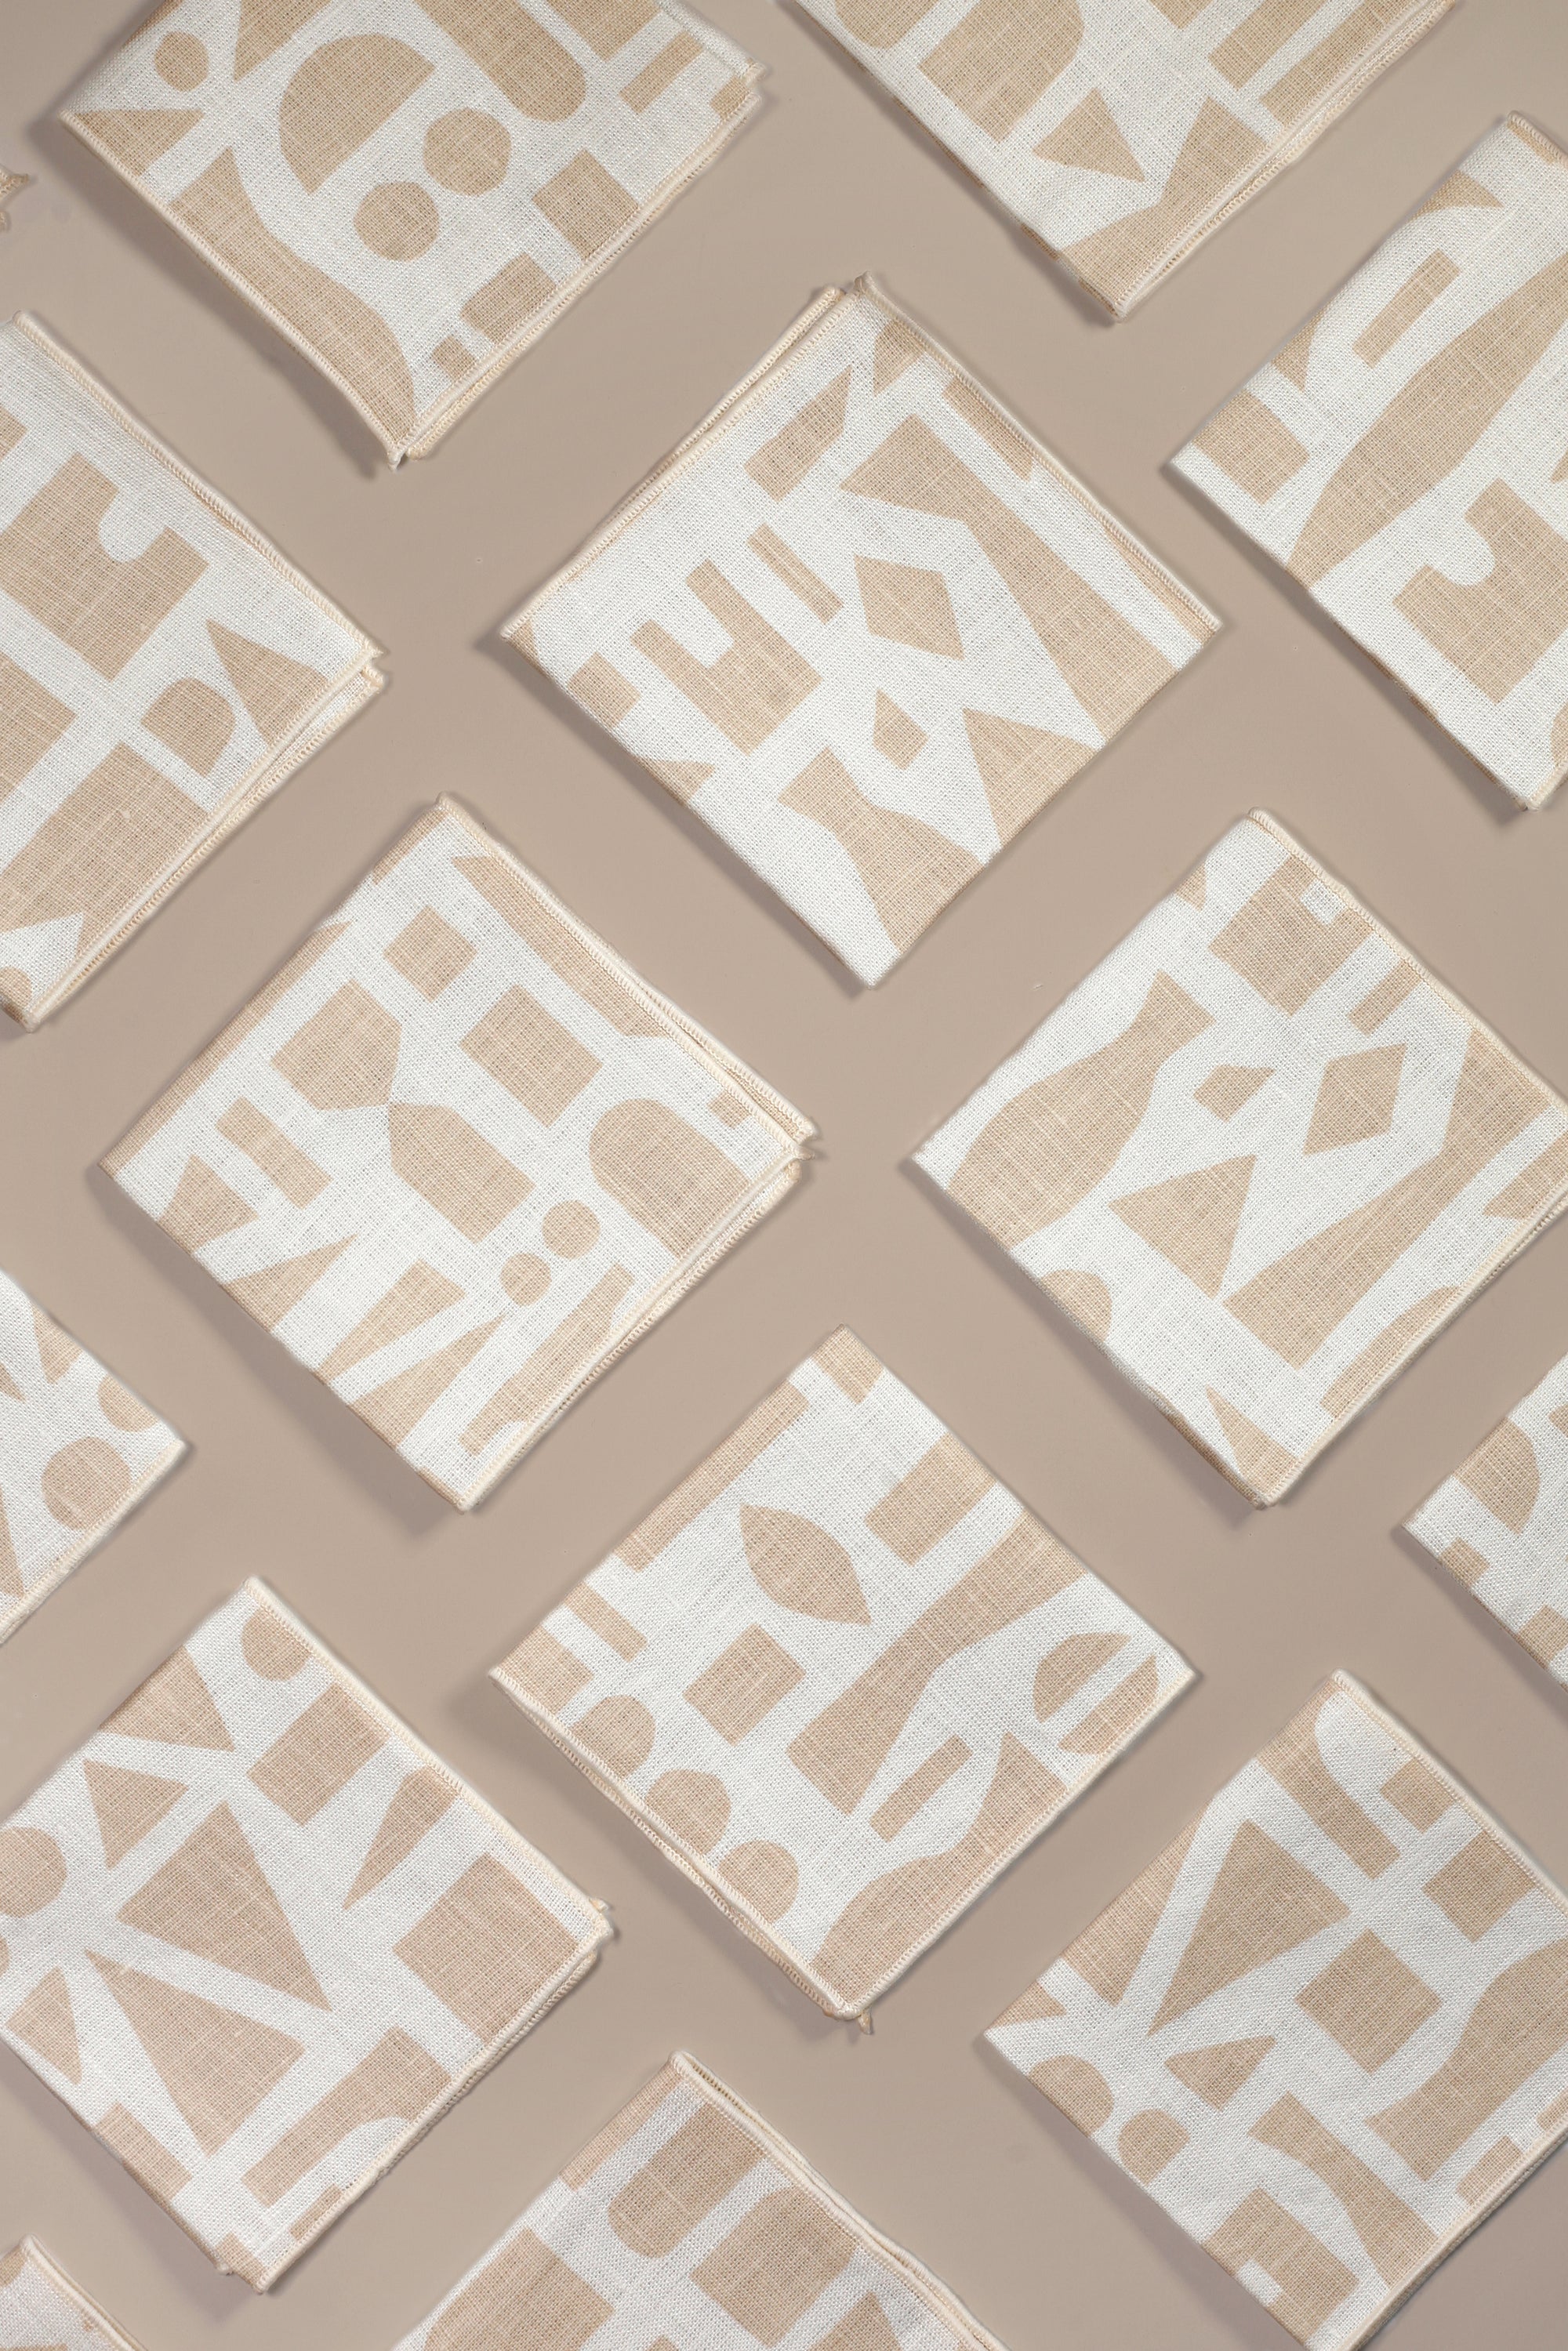 Bundle: 'Mixta' Hand-Printed Linens, Dinner and Drinks for 4